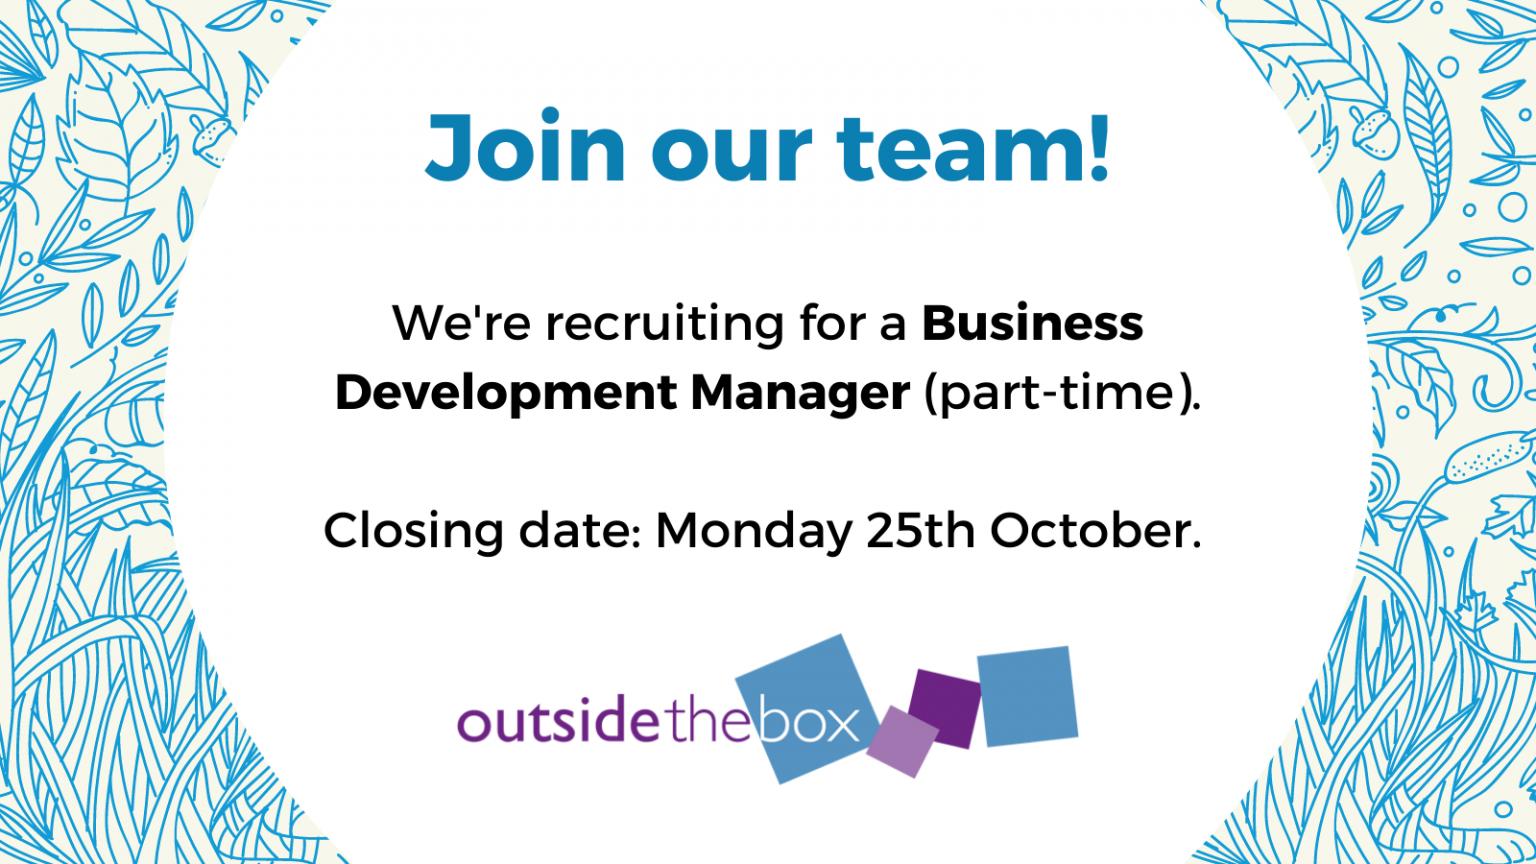 Join our team! We're recruiting for a Business Development Manager (part time). Closing date Monday 25th October